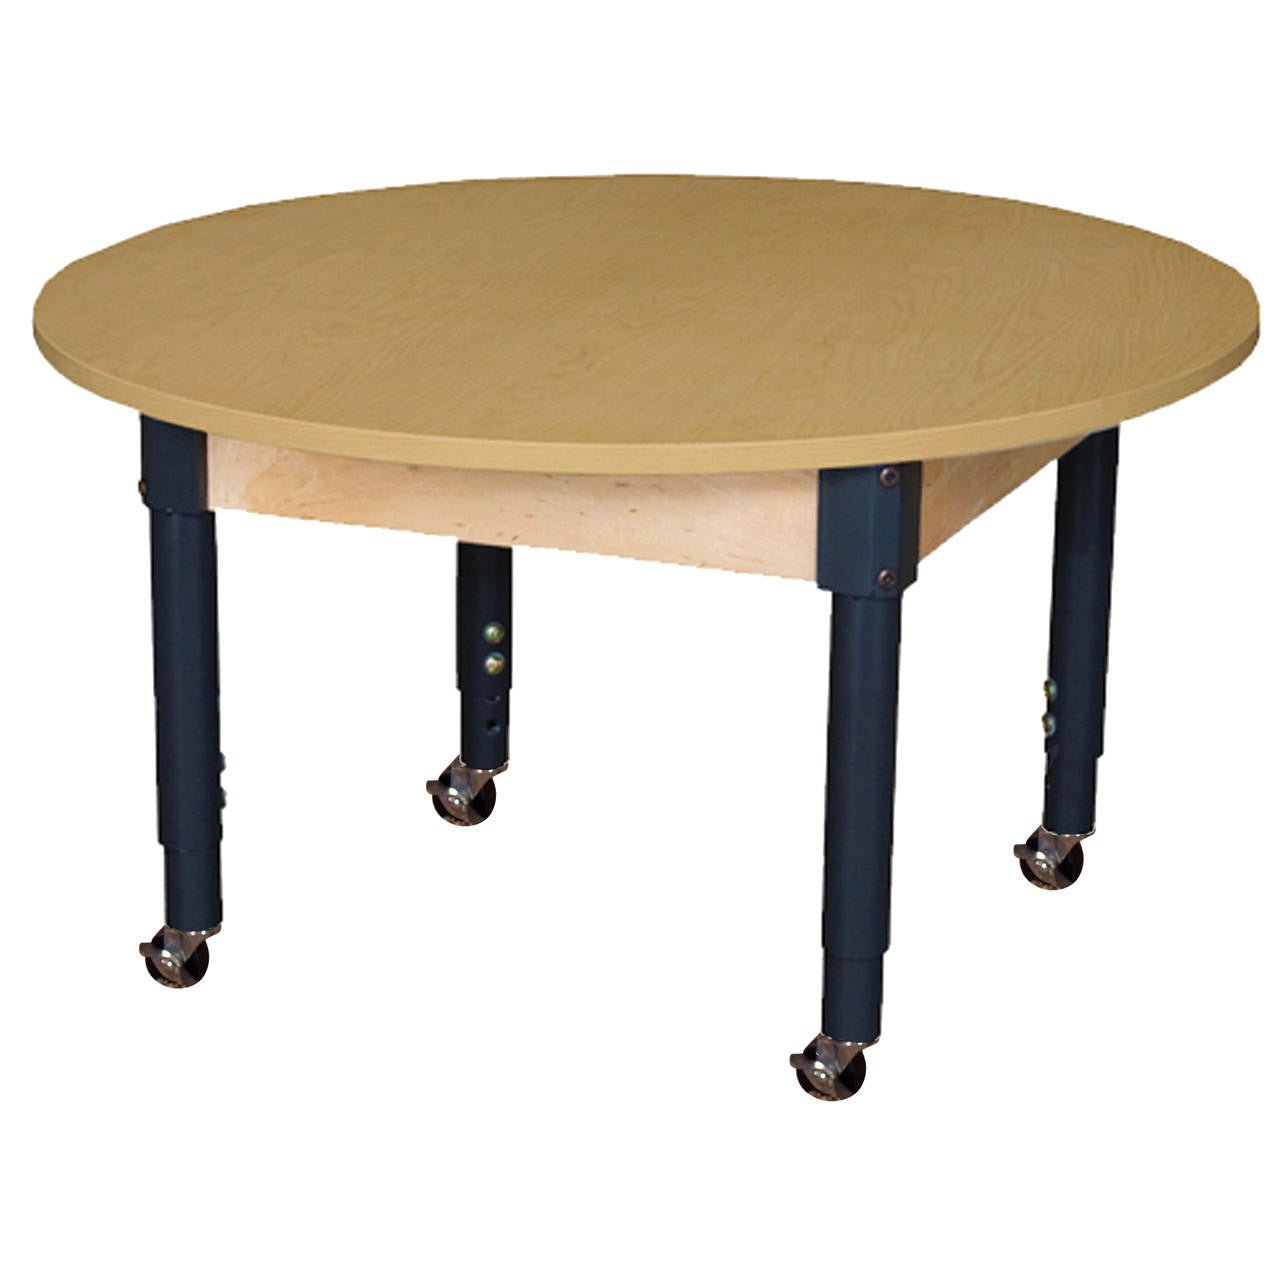 Mobile Round High Pressure Laminate Table with Adjustable Legs 14-19